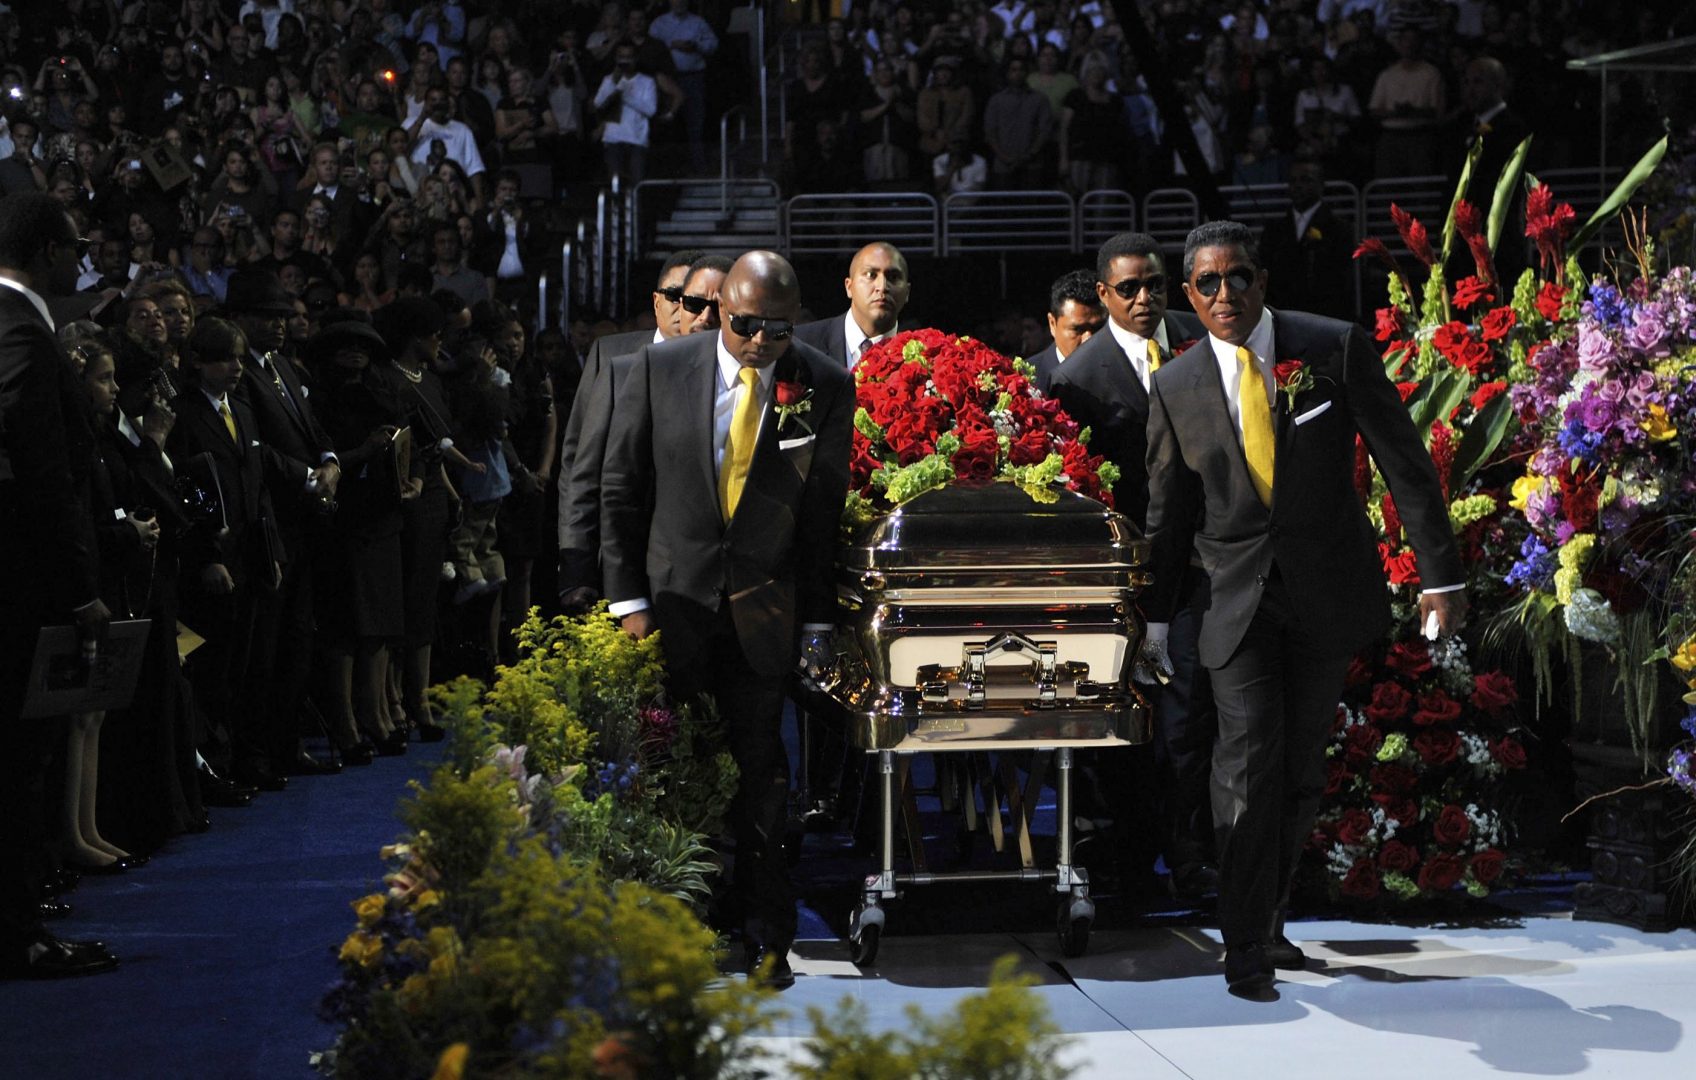 Michael Jackson's casket is brought out during public memorial service held at Staples Center in Los Angeles July 7, 2009. A Gospel choir singing "We're going to see the king" launched an emotional public memorial for Michael Jackson on Tuesday as the music world and thousands of fans bade farewell to the singer known as the "King of Pop."      REUTERS/Harrison Funk/Handout  (UNITED STATES)    NO SALES NO ARCHIVE (ENTERTAINMENT OBITUARY IMAGES OF THE DAY)